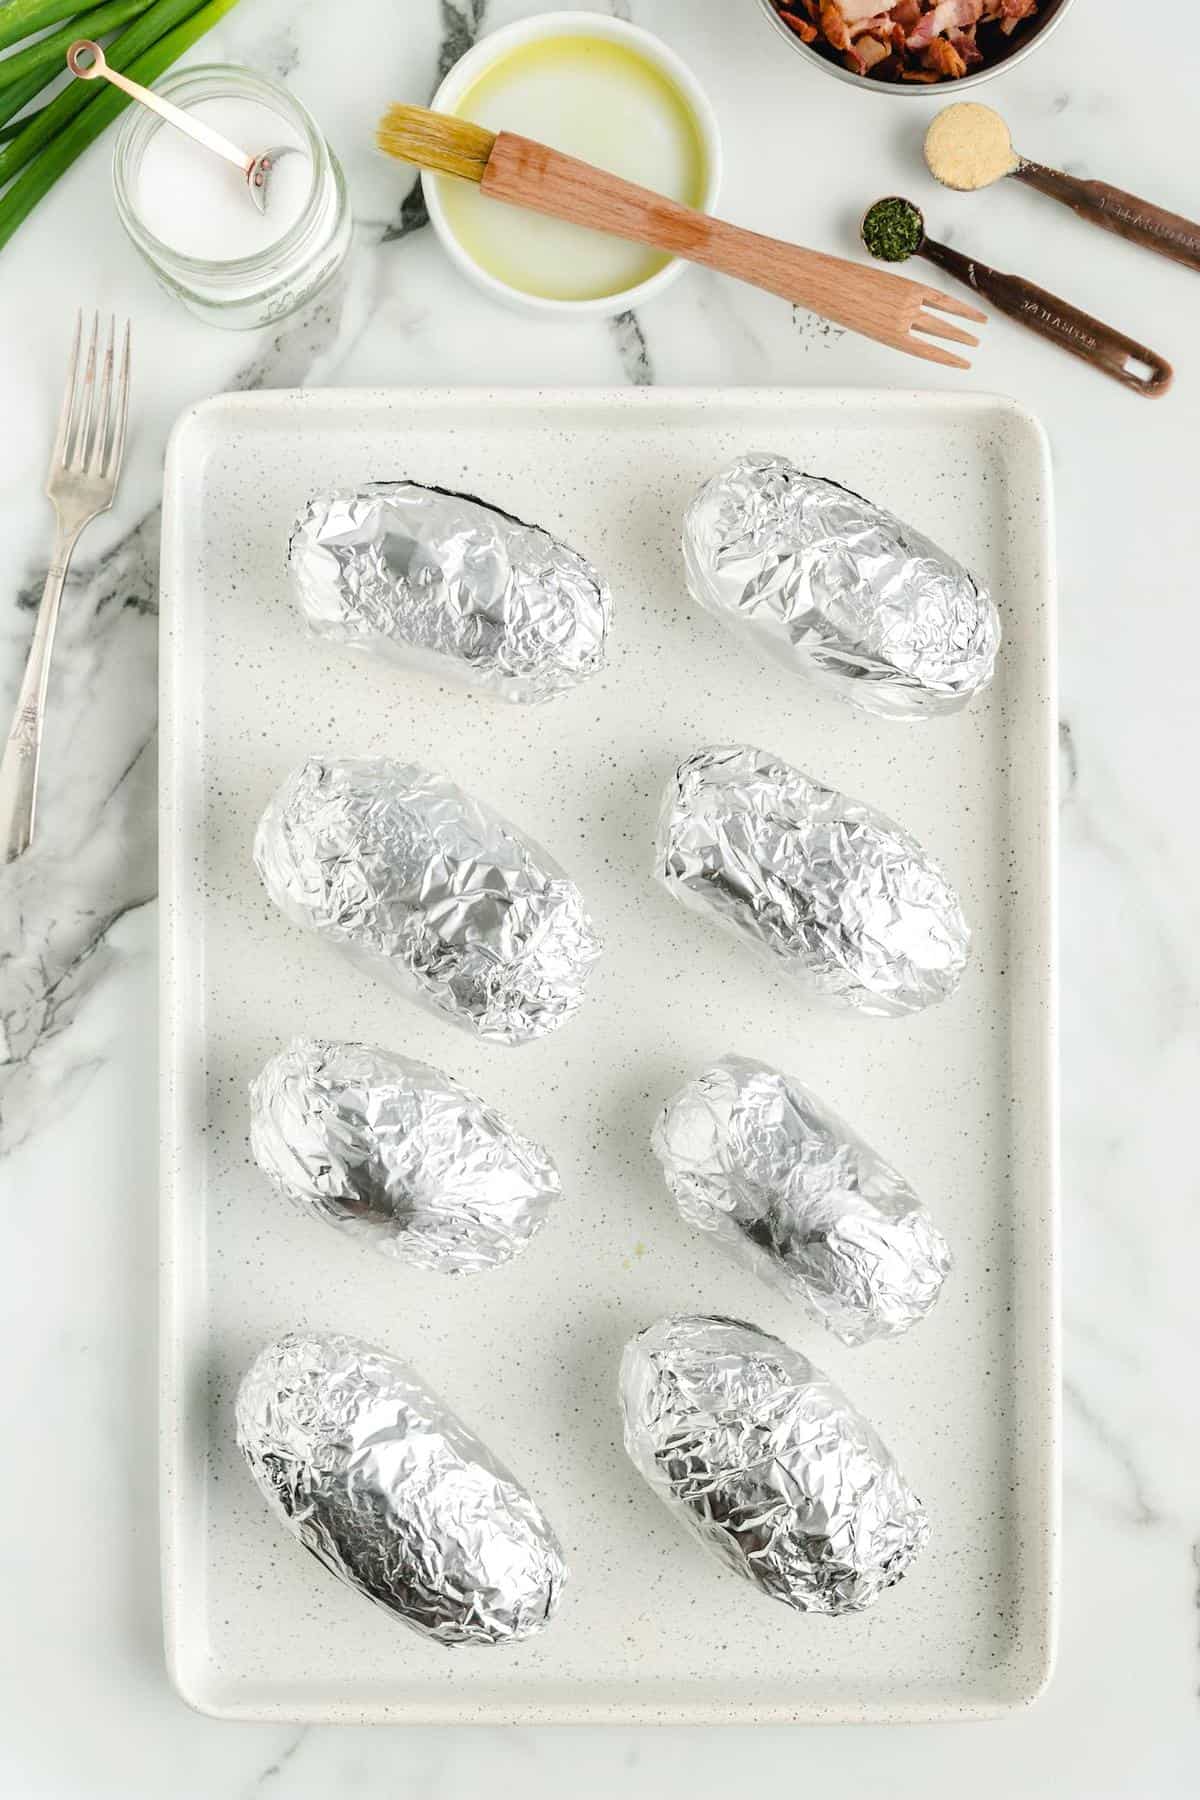 potatoes wrapped in foil on top of baking sheet